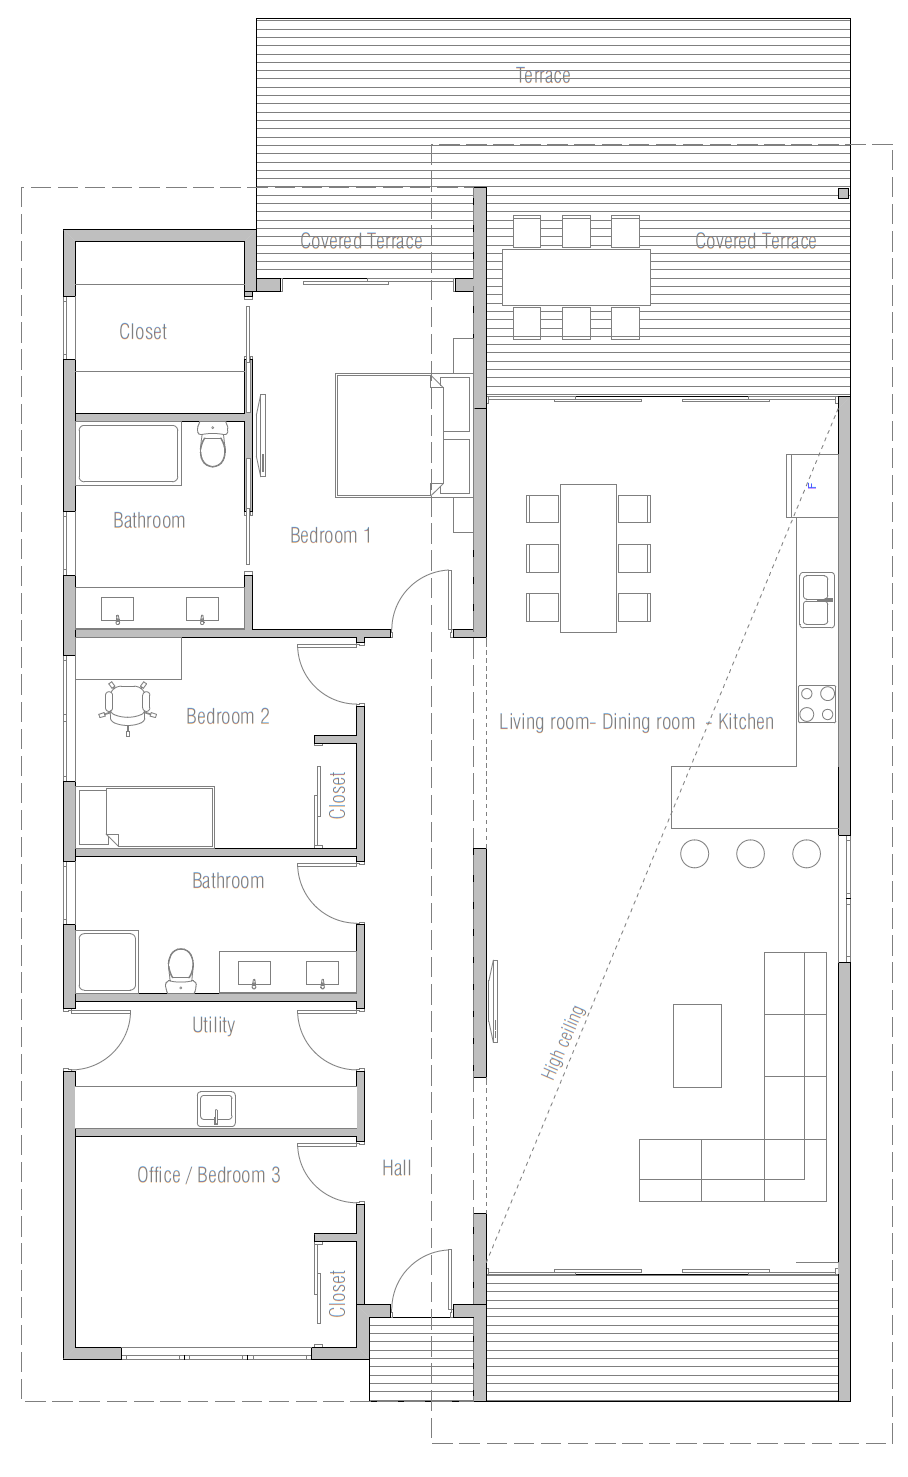 best-selling-house-plans_10_house_plan_ch280.png